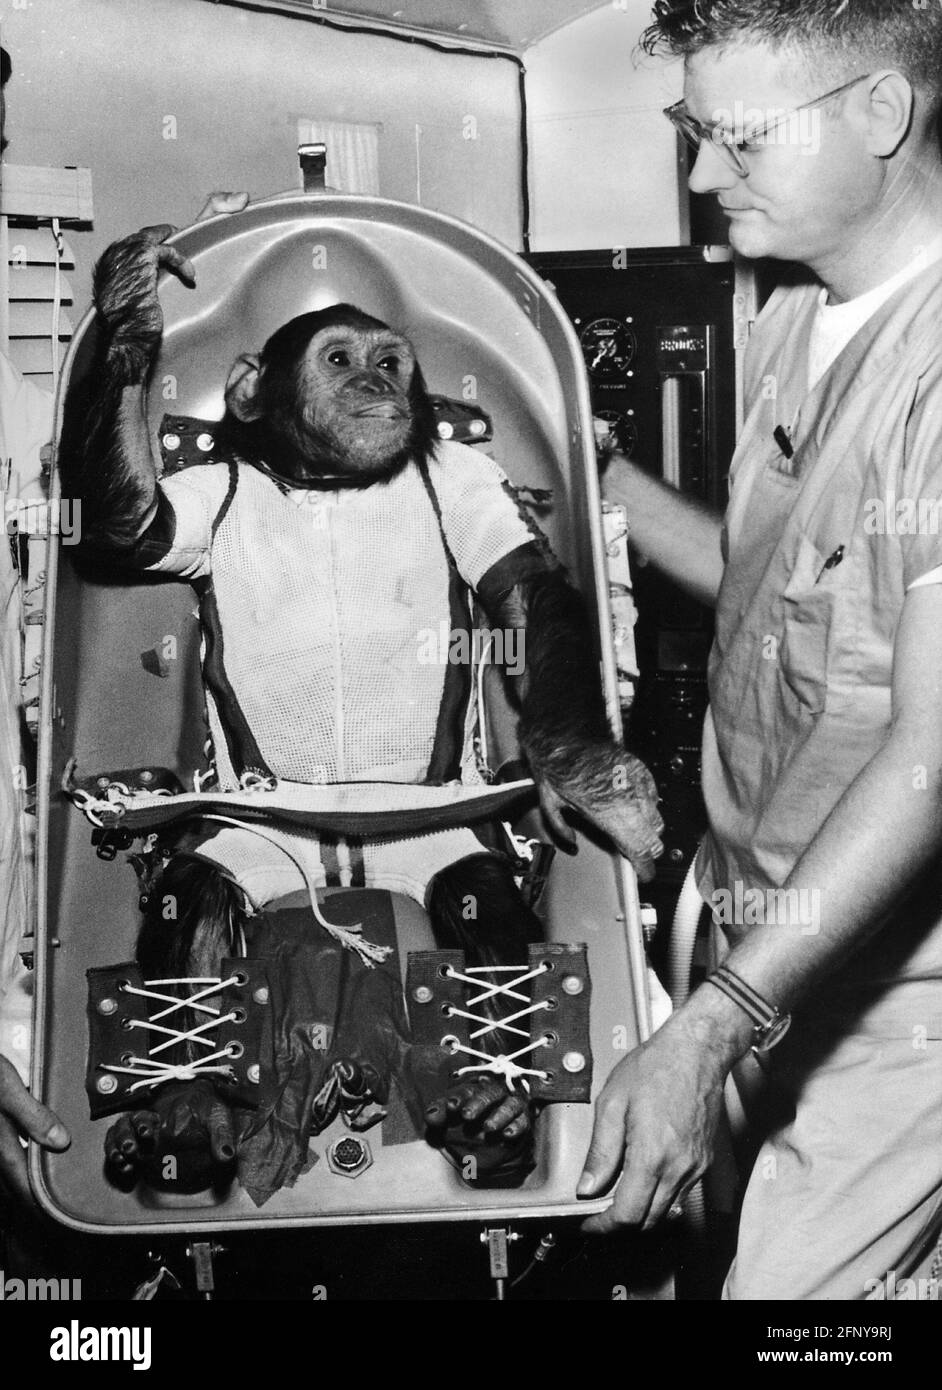 astronautics, animal, USA, 'Ham', Mercury Redstone 2, test with a chimpanzee in a space capsule, ADDITIONAL-RIGHTS-CLEARANCE-INFO-NOT-AVAILABLE Stock Photo